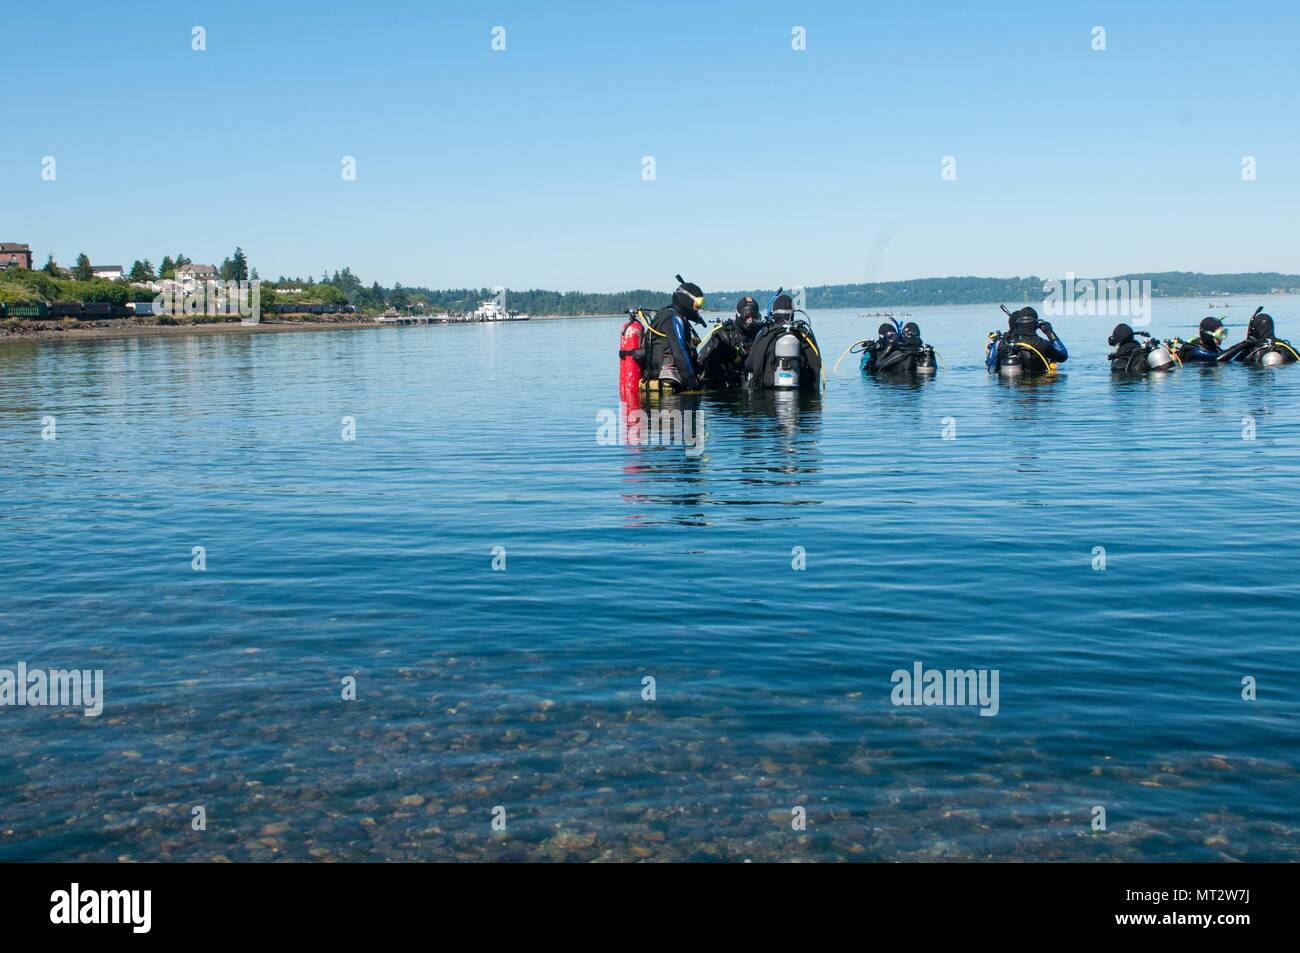 Mike Nebel, a dive instructor with the Northwest Adventure Center on Joint Base Lewis-McChord, leads dive students in pre-dive inspections and buoyancy checks during an open water scuba class at Sunnyside Beach in Steilacoom, Washington June 24, 2017. (U.S. Army photo by Sgt. Youtoy Martin, 5th Mobile Public Affairs Detachment) Stock Photo